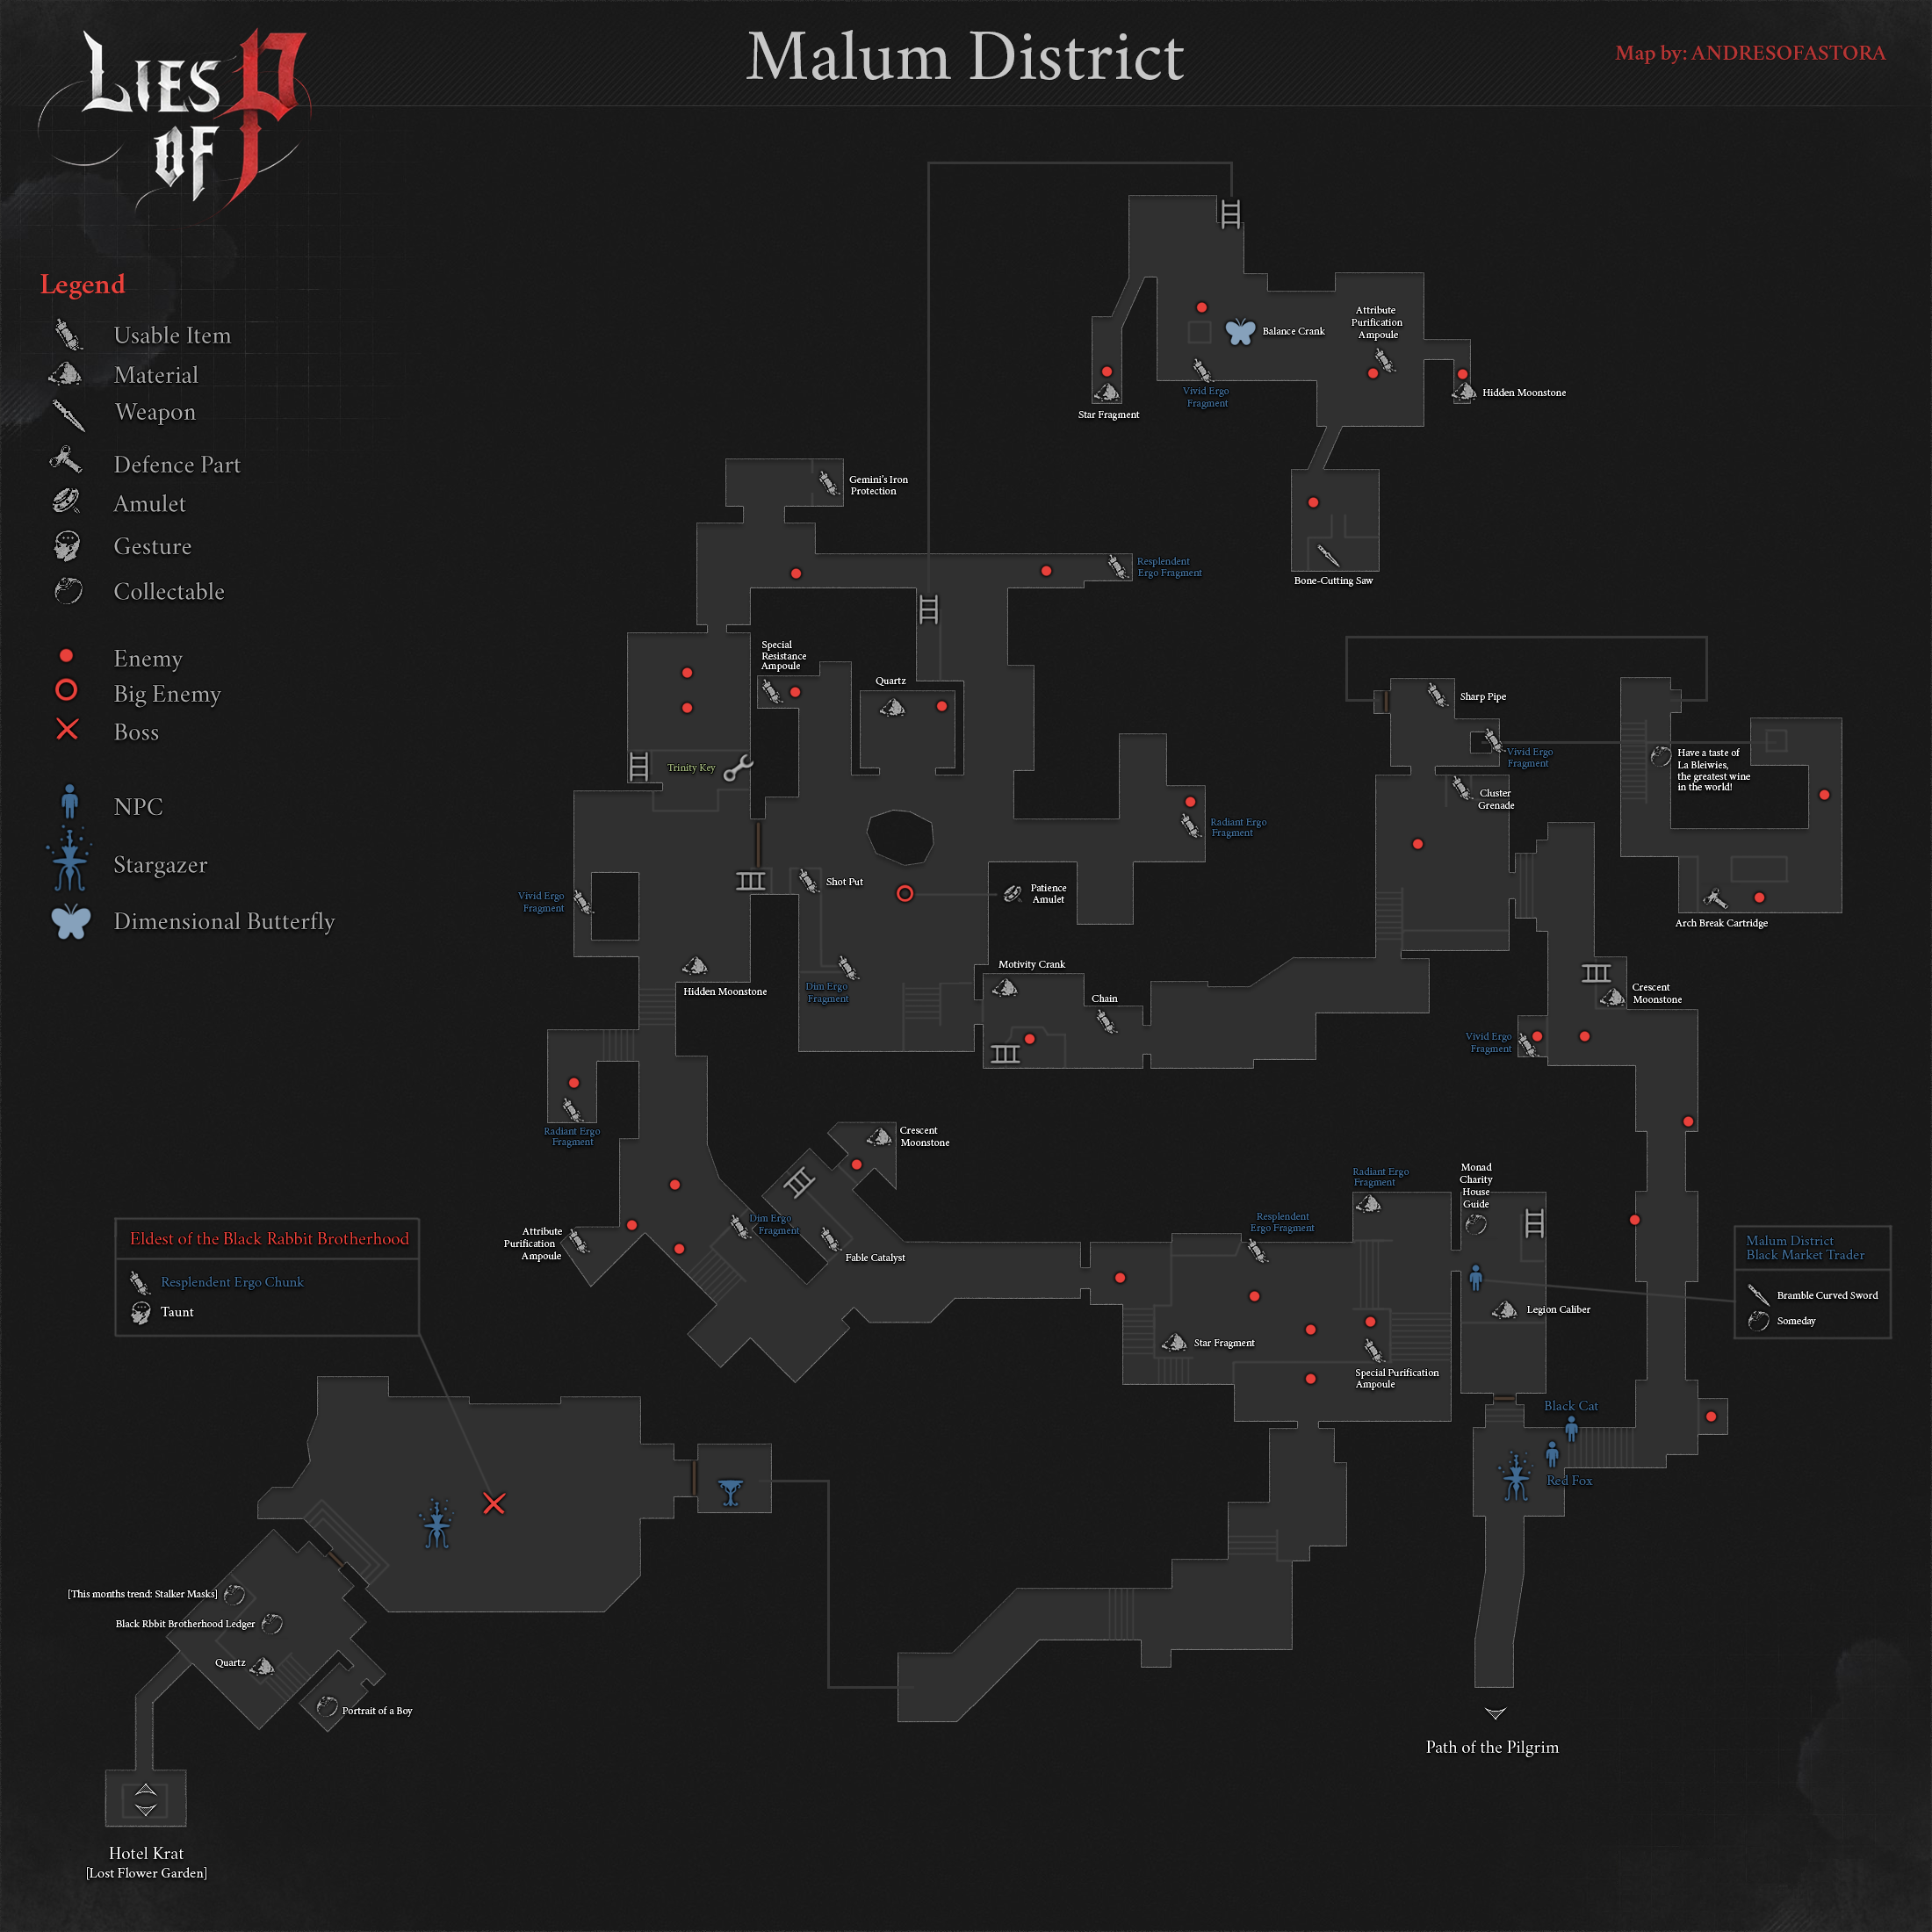 How To Get Through The Malum District In Lies Of P